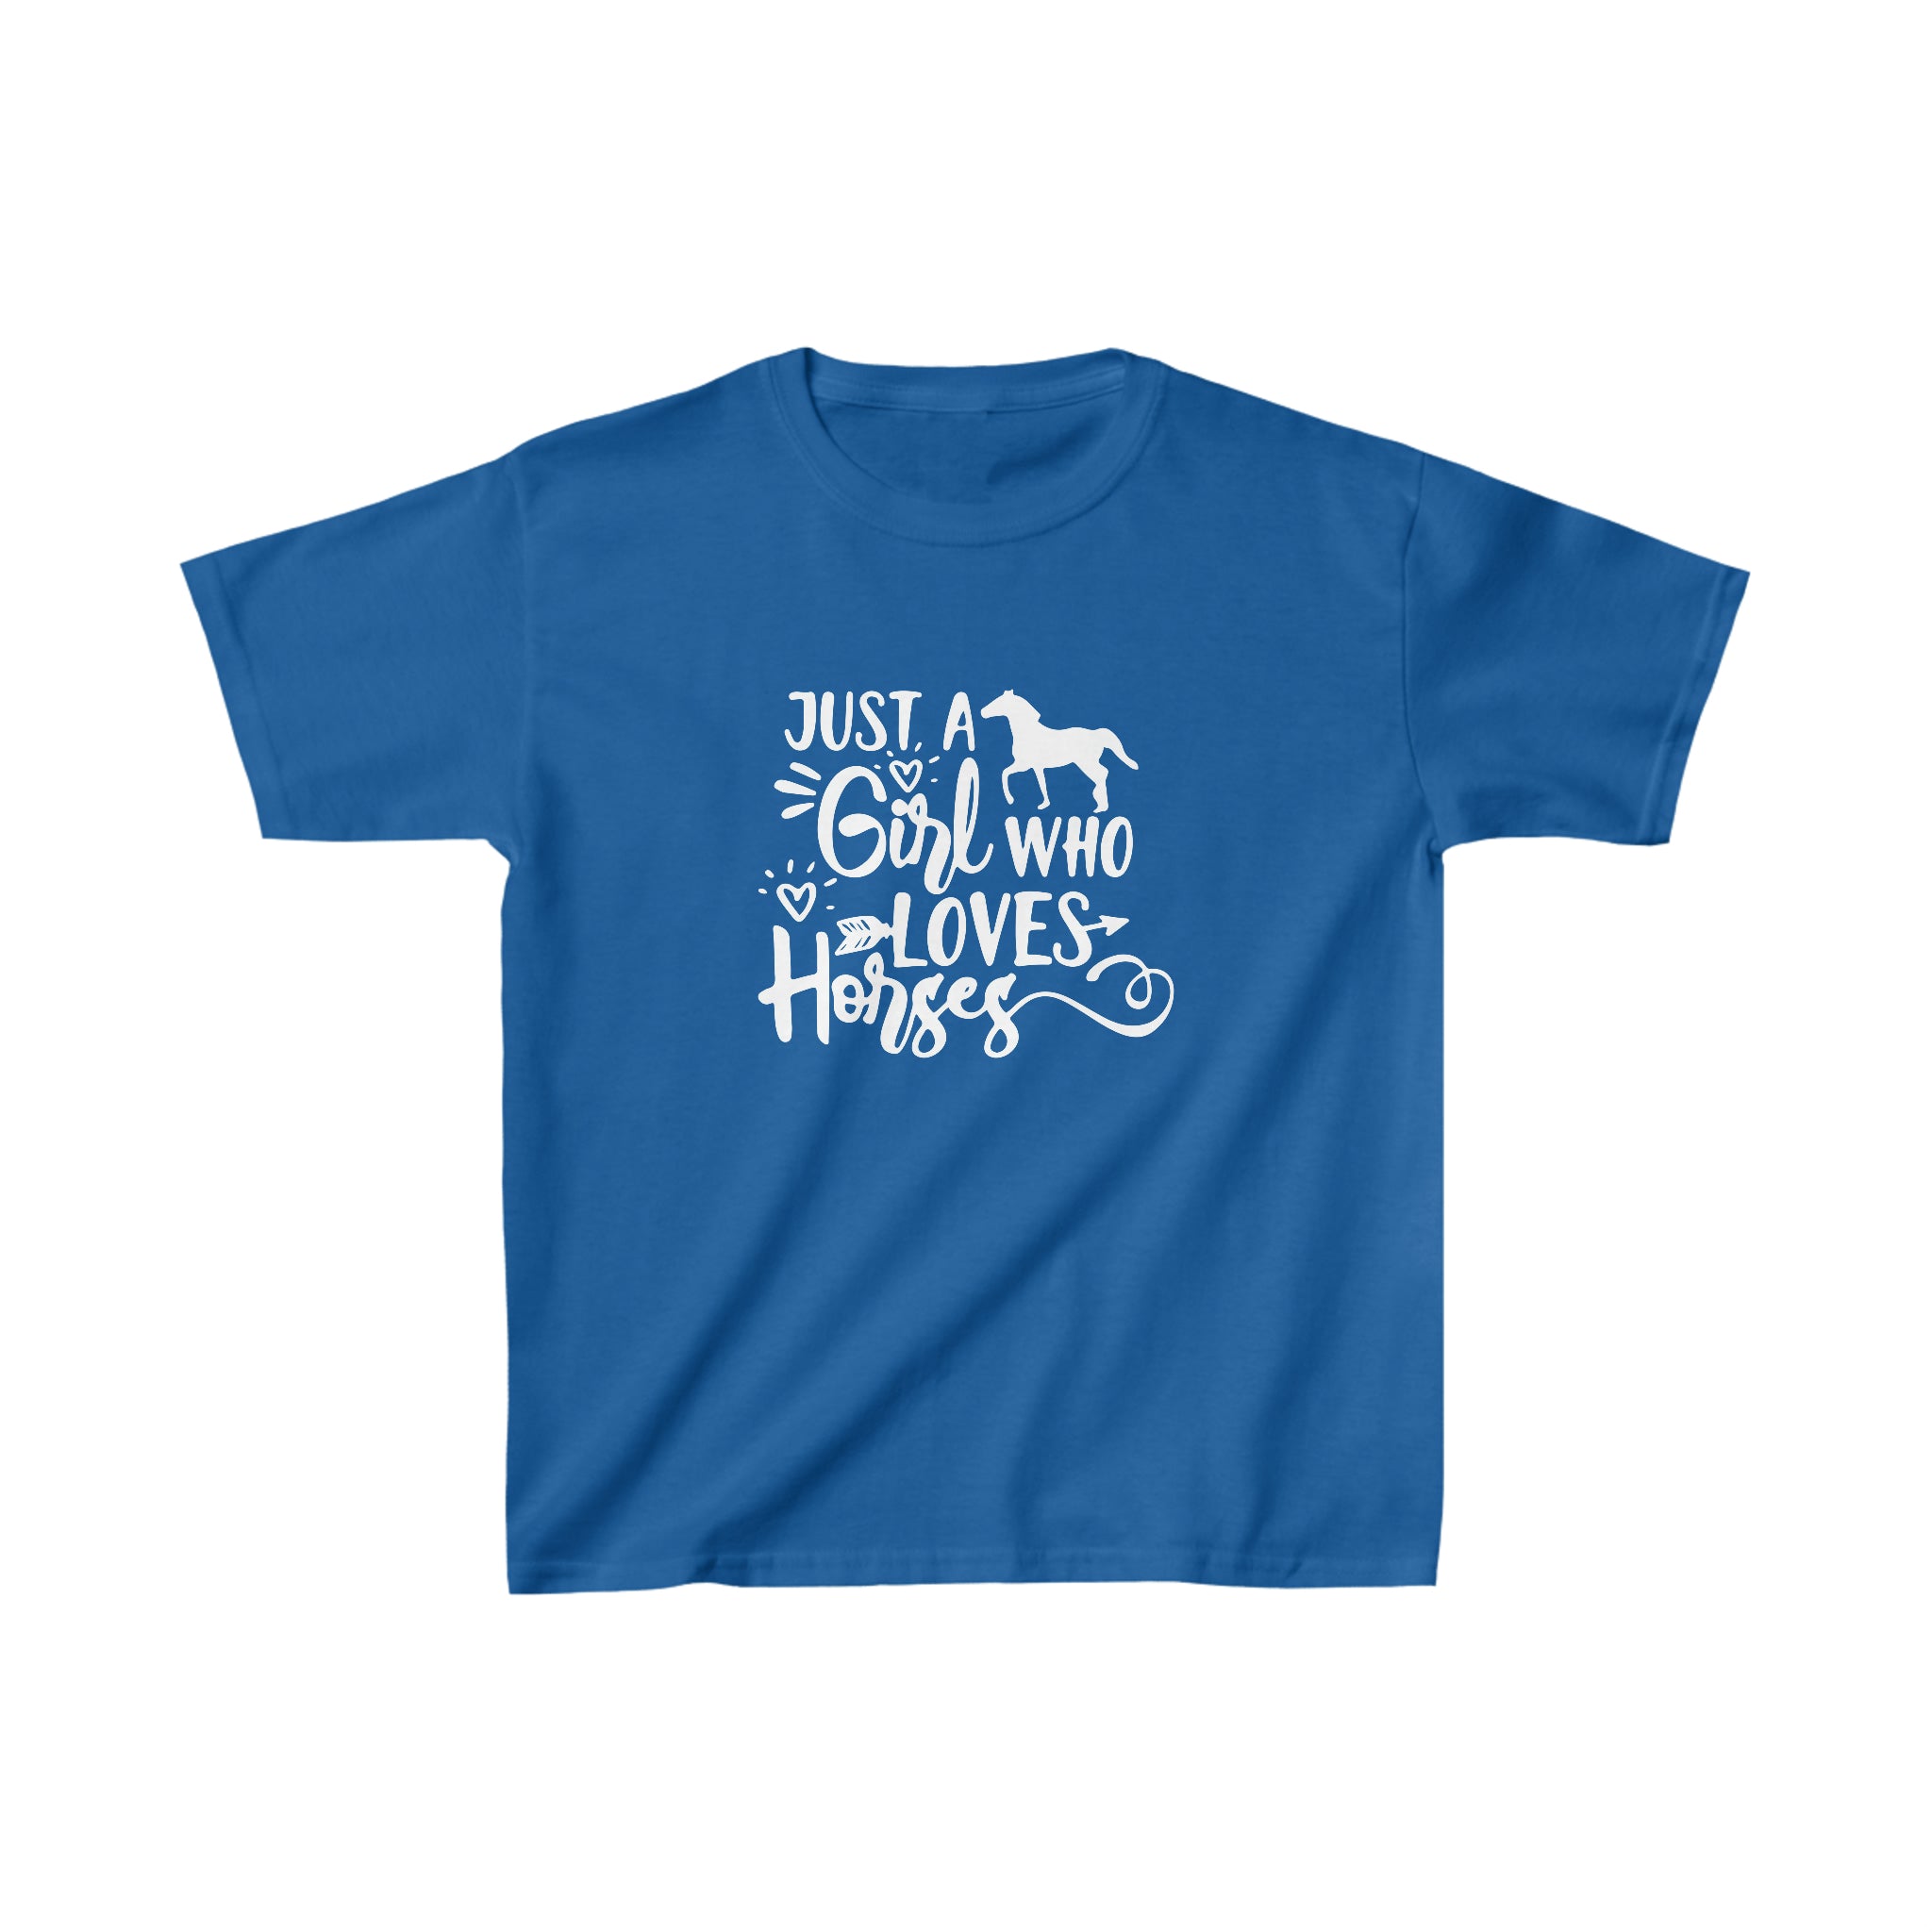 Just A Girl Who Loves Horses Kids Tee